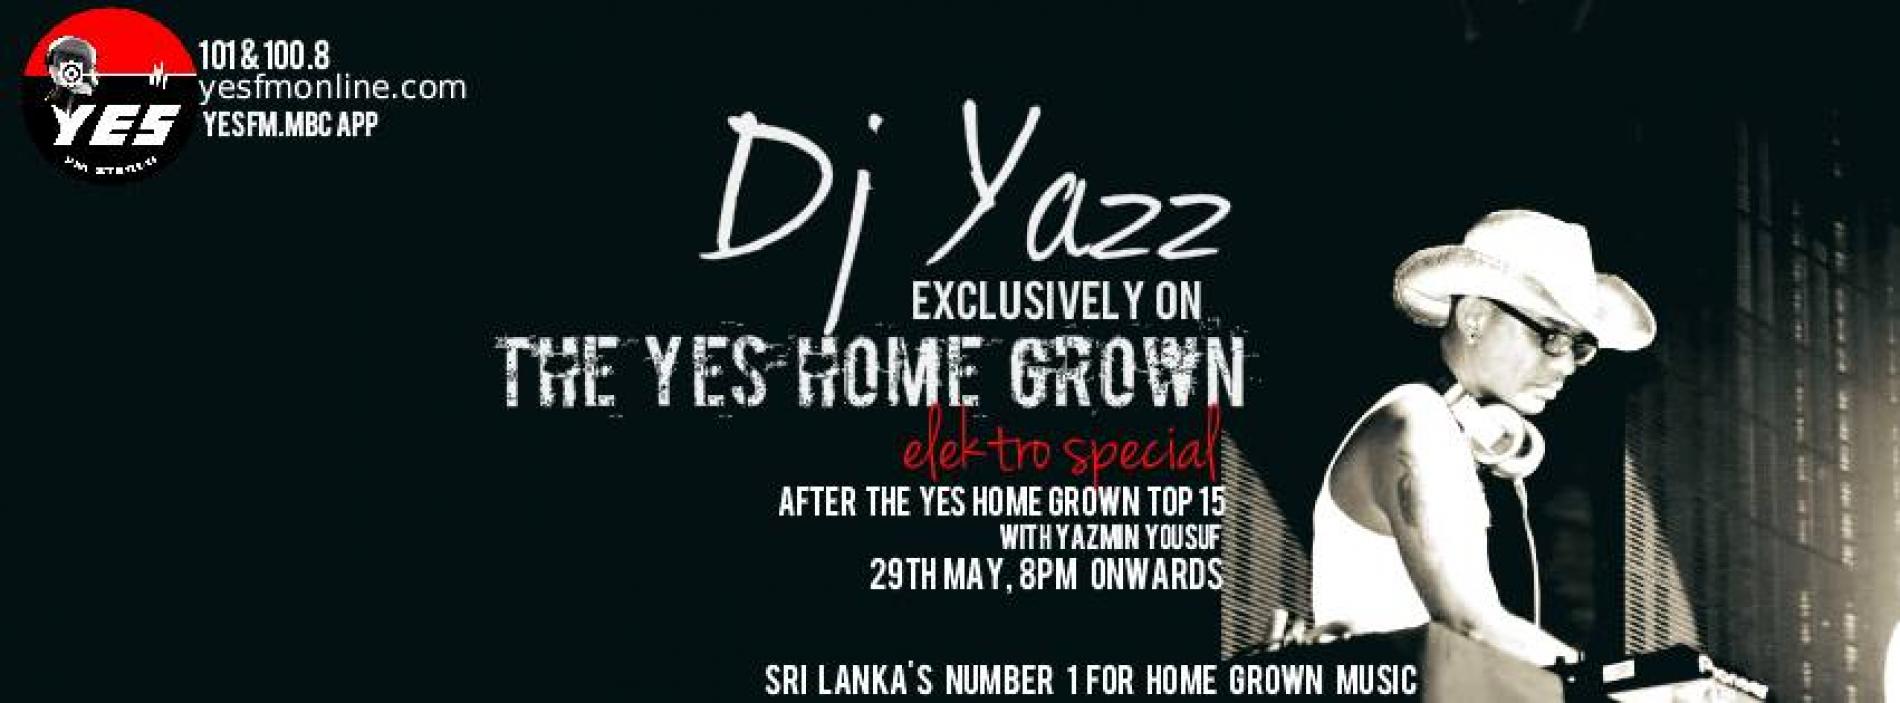 DJ Yazz On The YES Home Grown Elektro Special